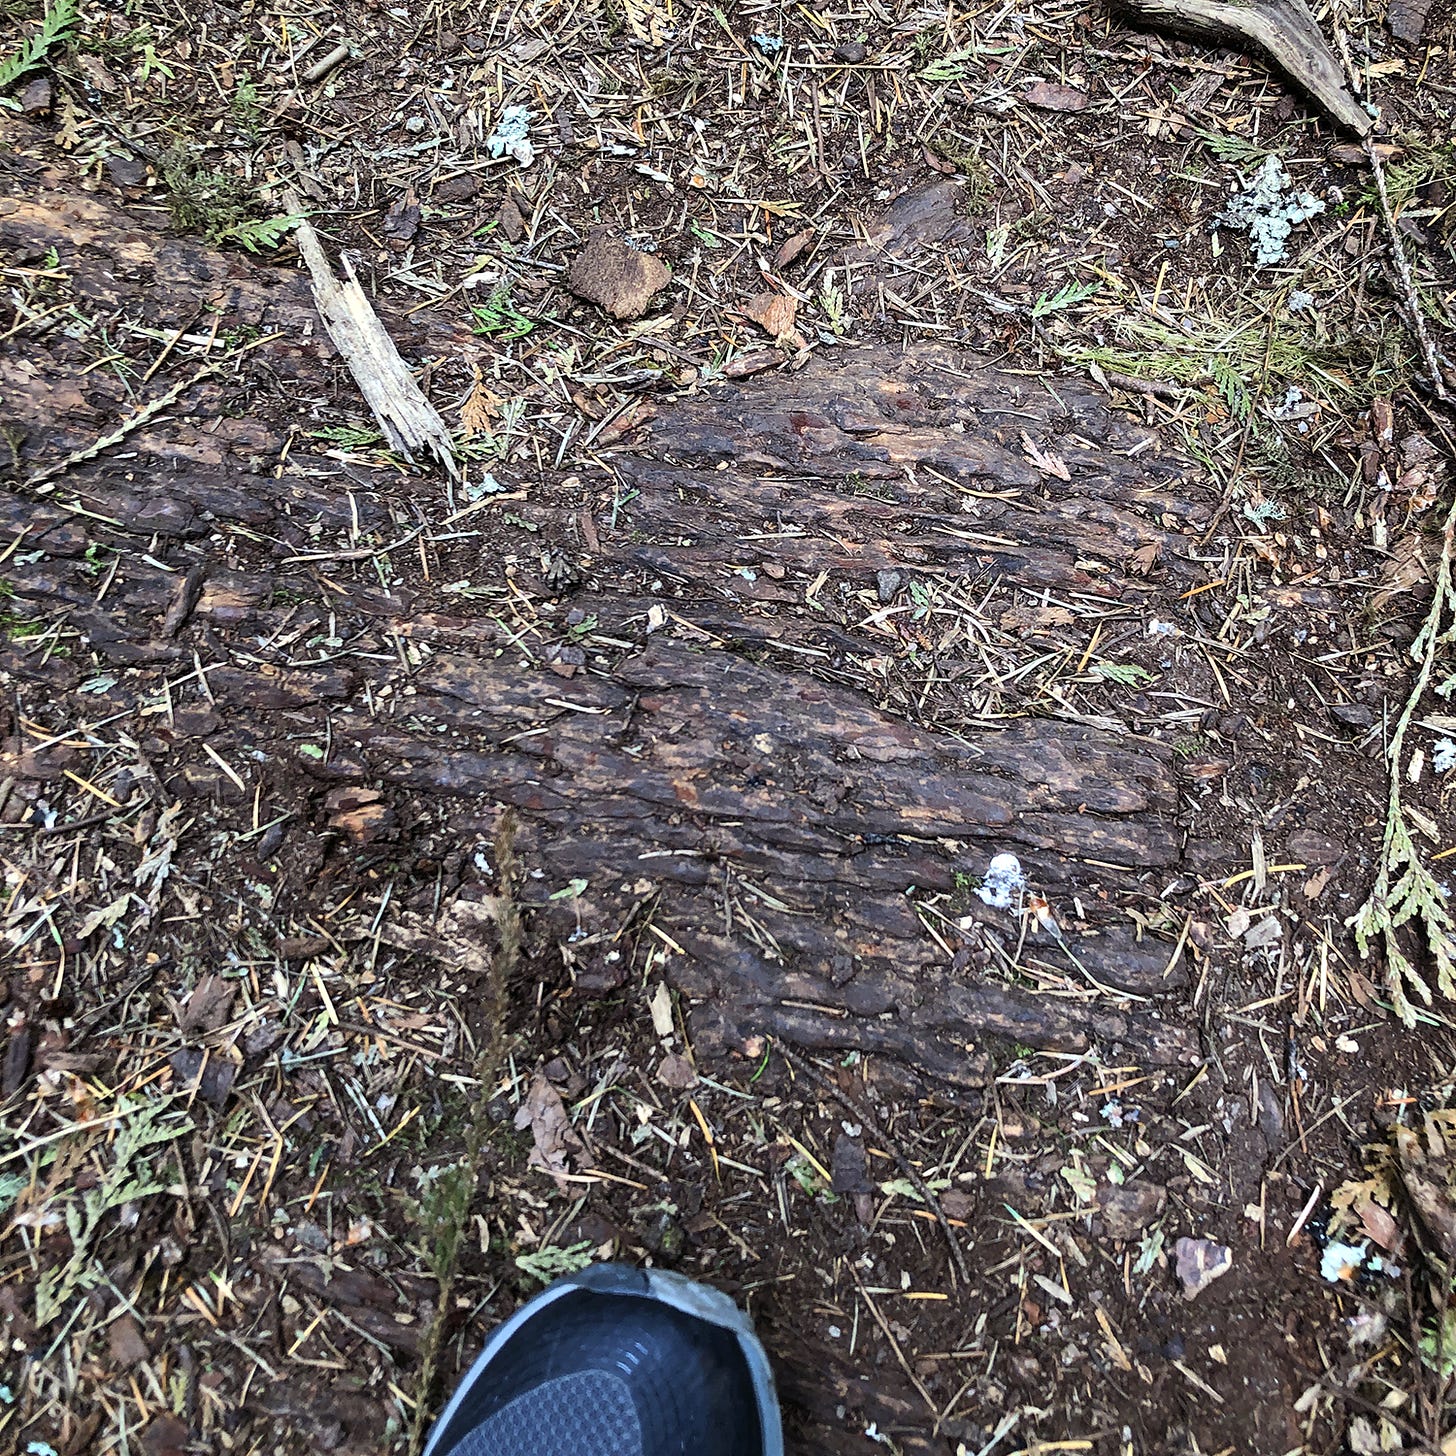 Toe of a sneaker on ground that looks like the bark of a tree.